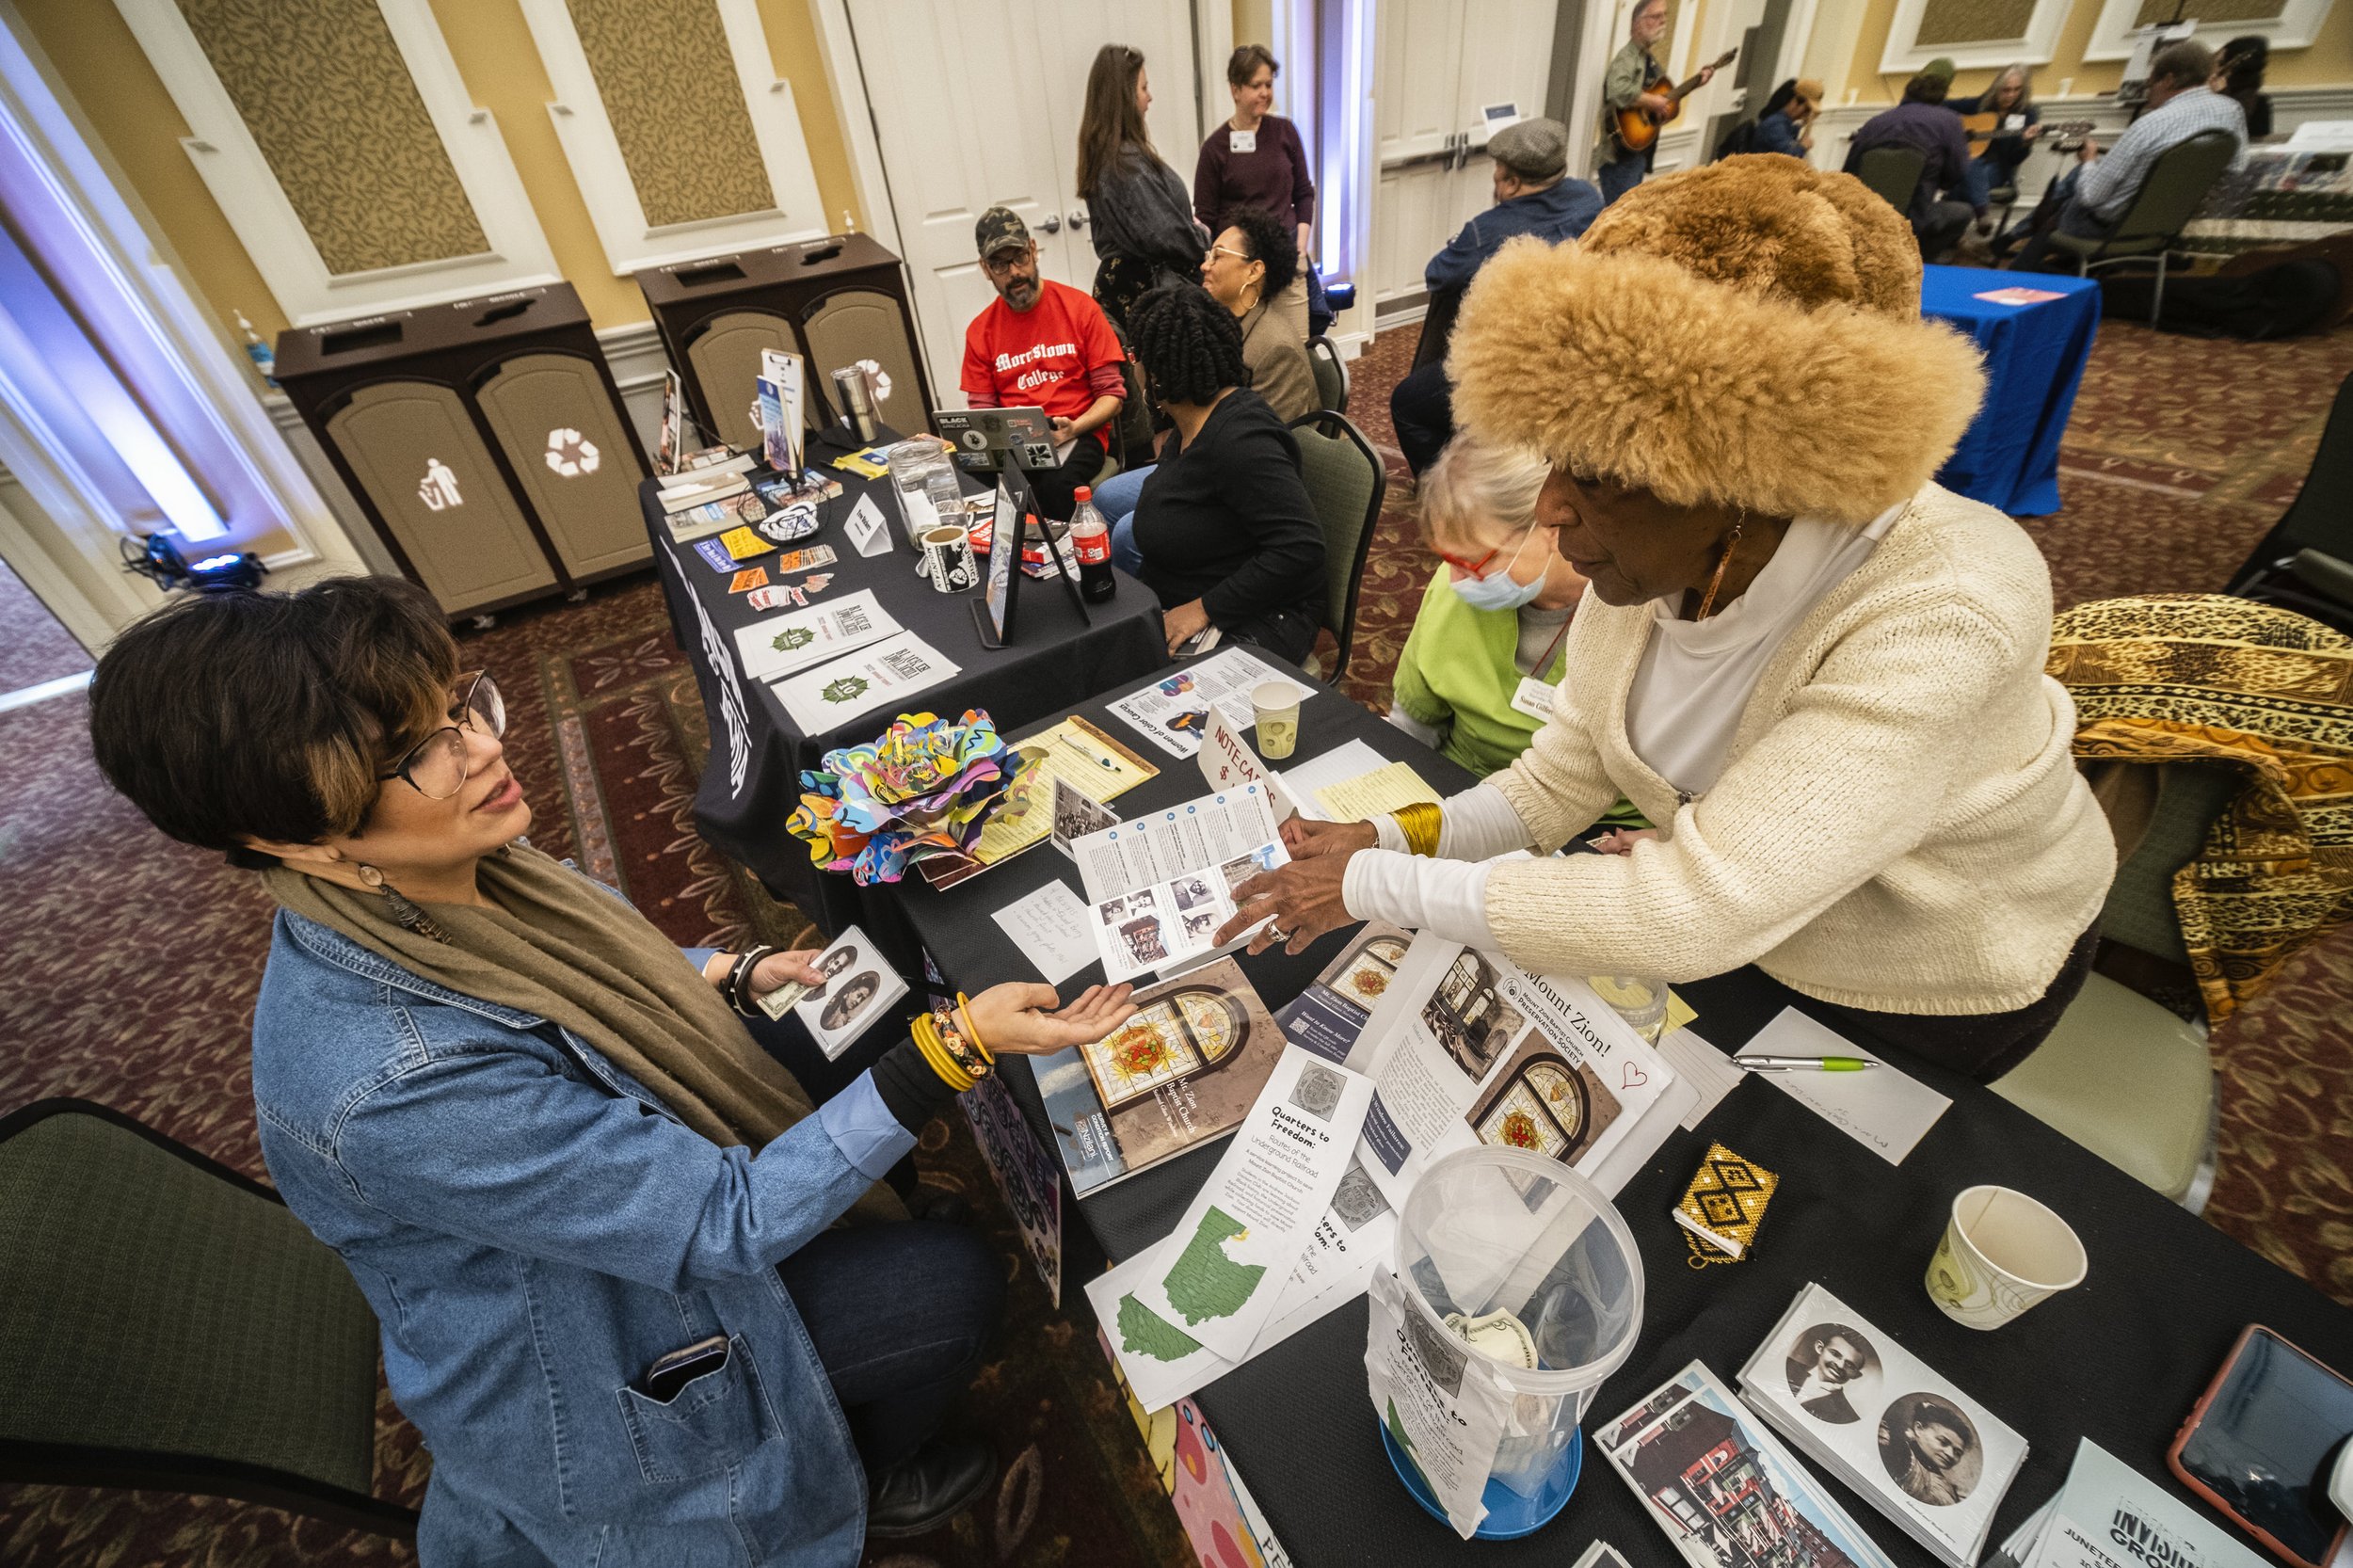  Dr. Tee Ford-Ahmed hands Affrilachian artist Crystal Good a brochure narrating the history of noteworthy Black Americans that lived in Athens county at the Mount Zion Baptist Church Preservation Society's booth during AppalachiaFest in Ohio Universi